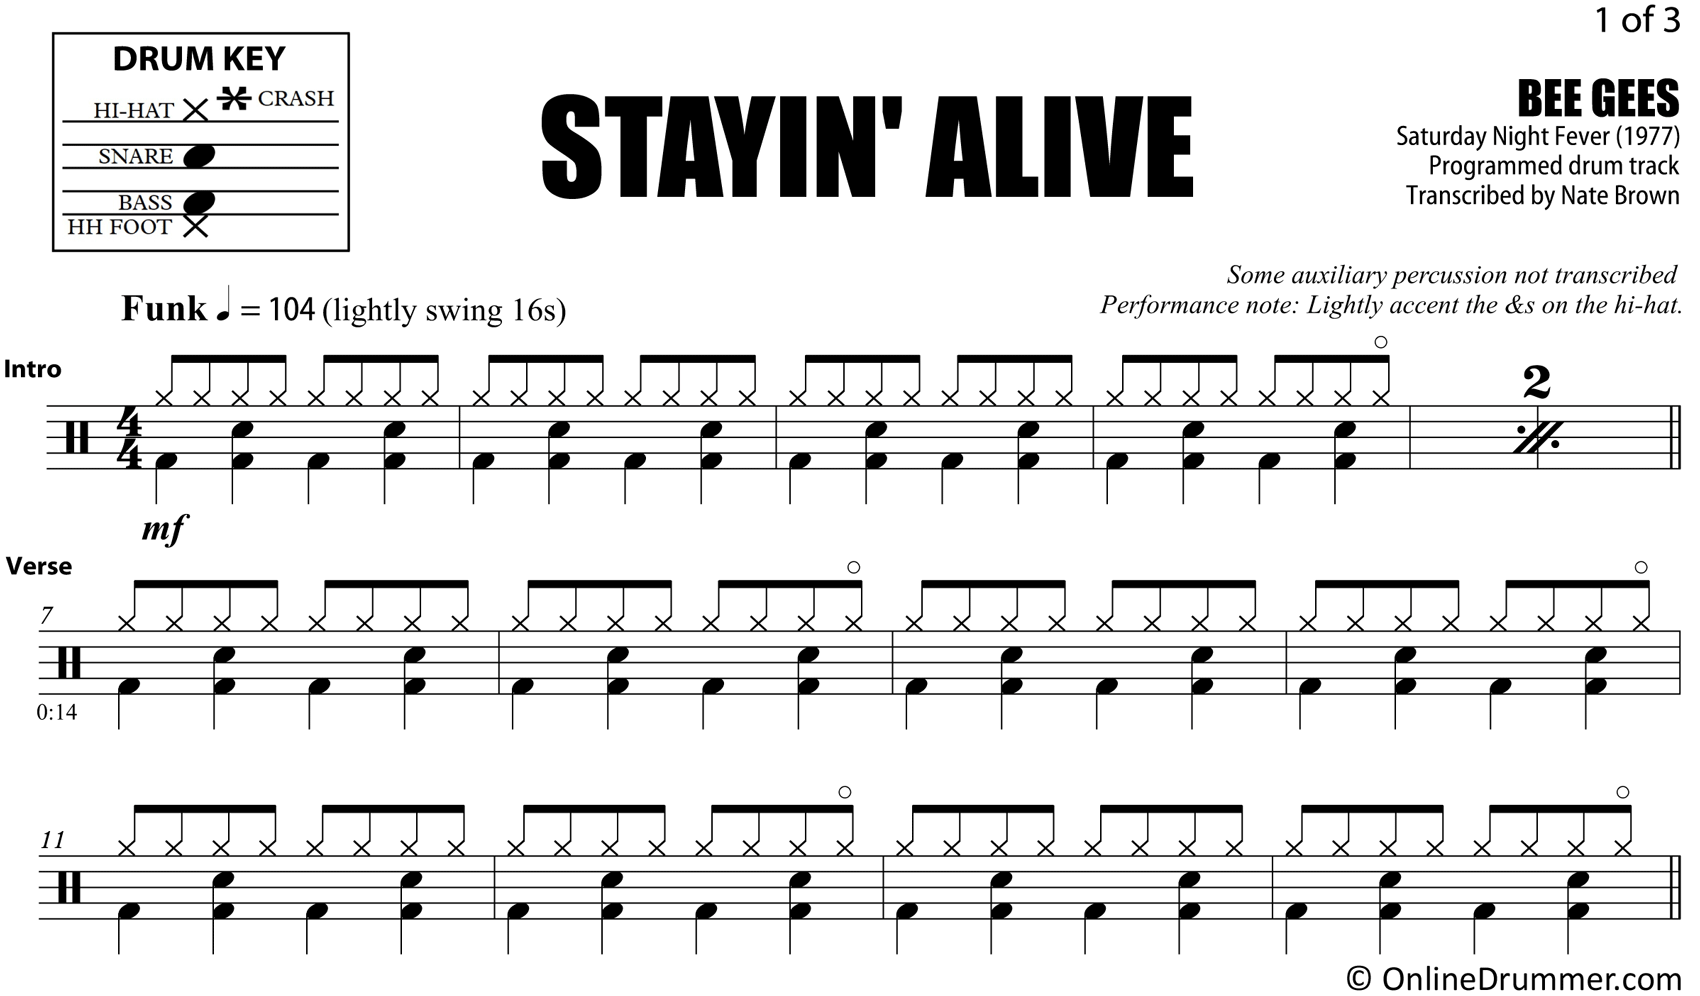 Stayin' Alive - Bee Gees - Drum Sheet Music